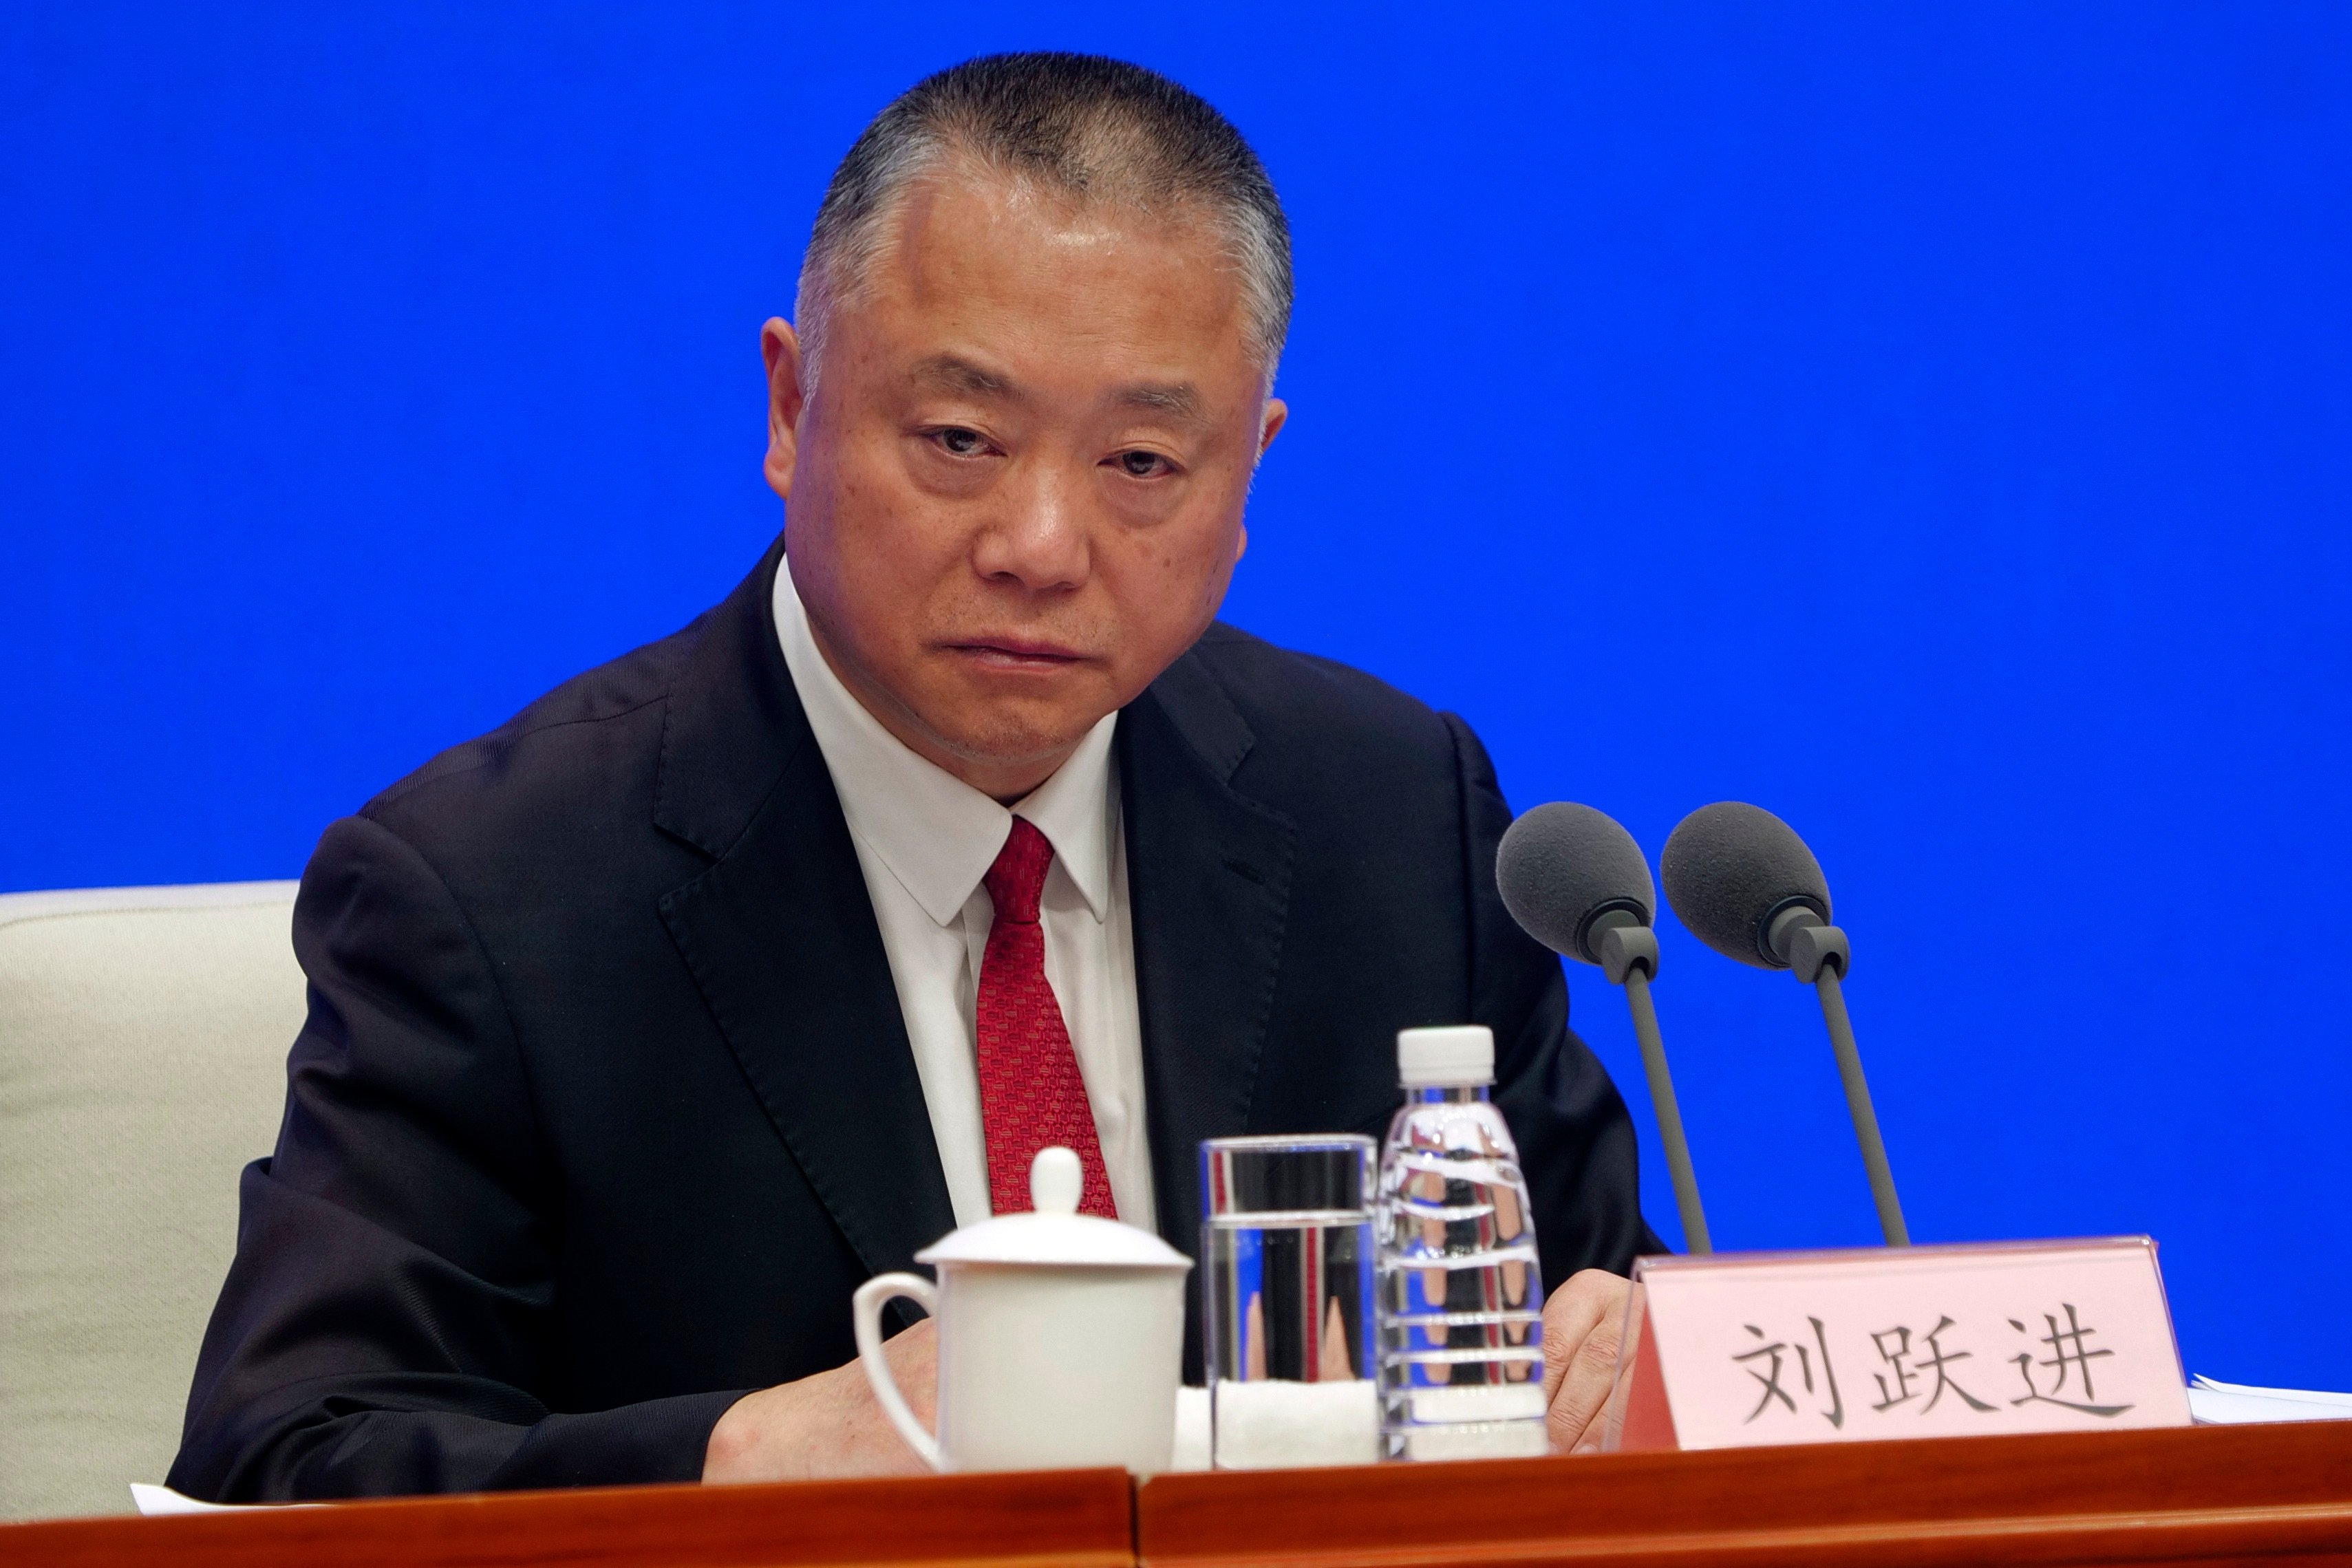 Liu Yuejin was appointed as the country’s first counterterrorism chief in late 2015. Photo: AP